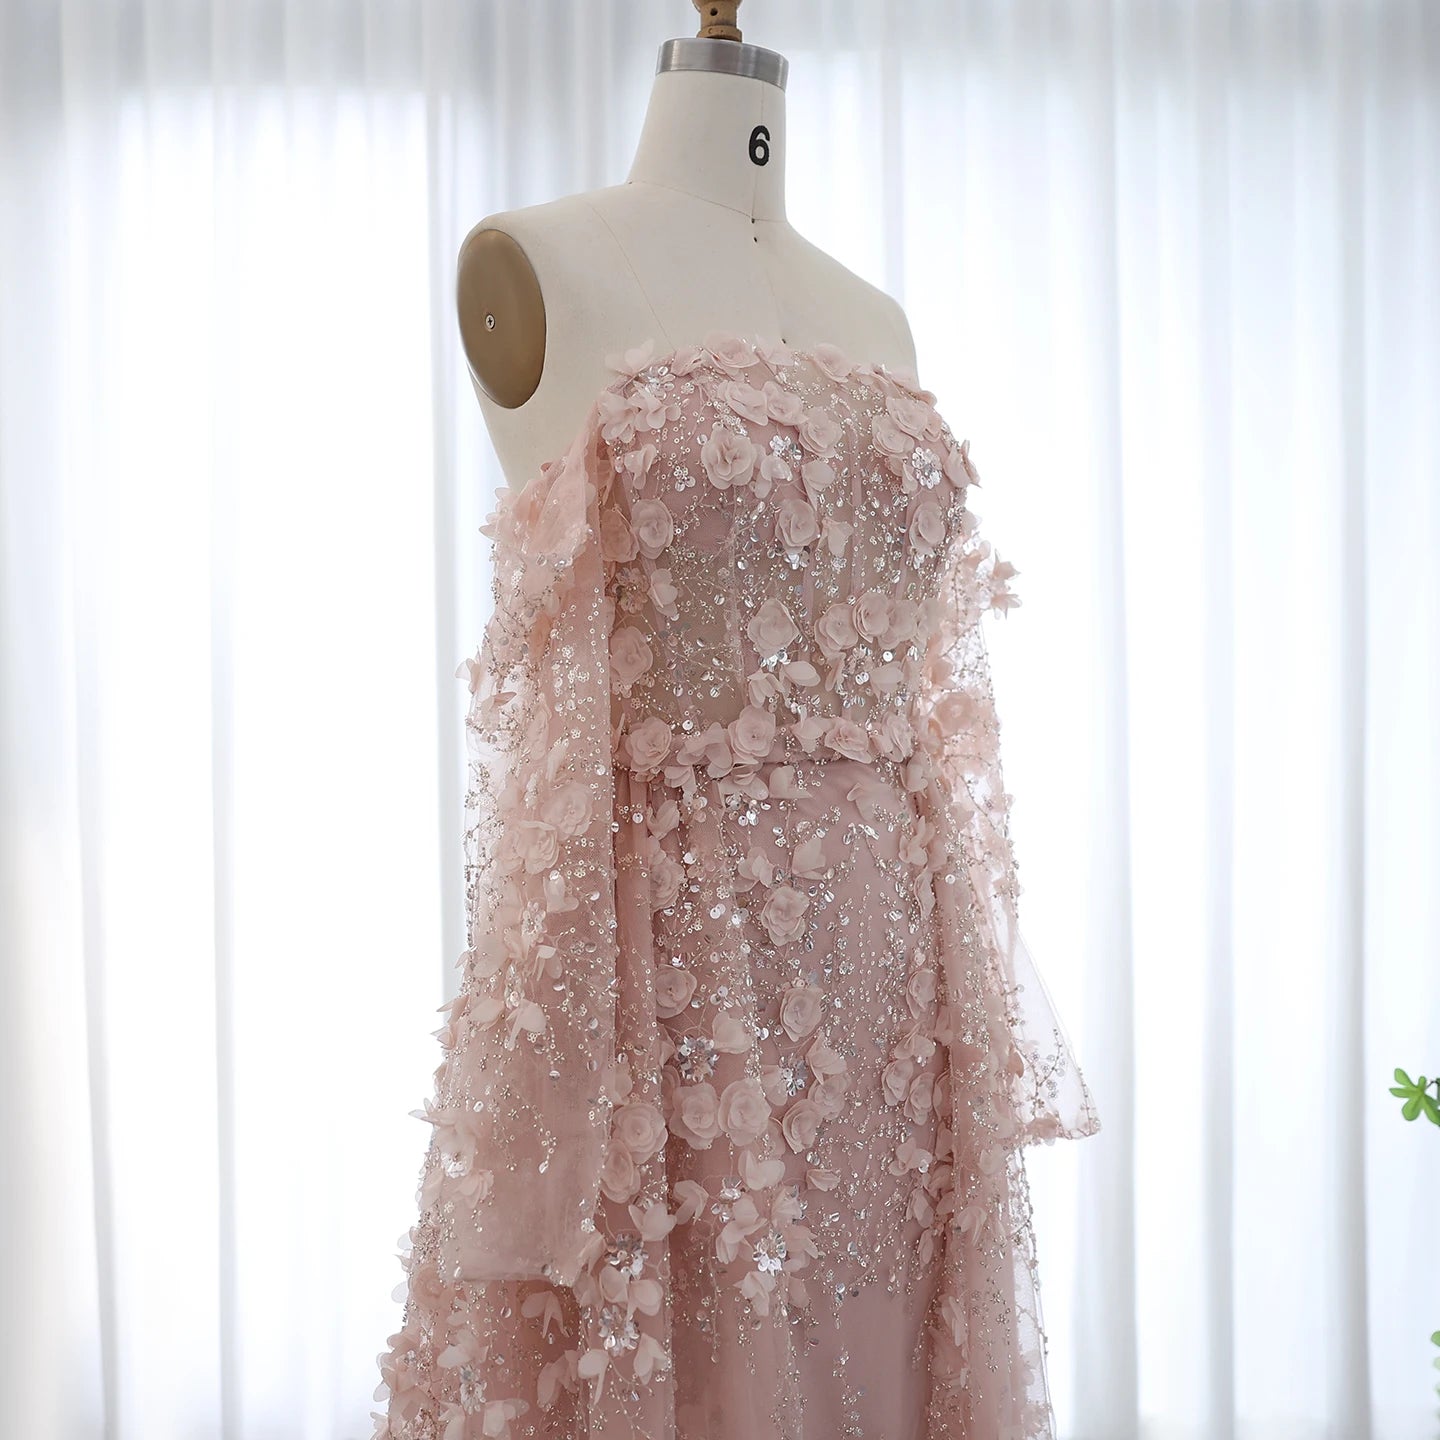 UU-Sharon Said Elegant 3D Flowers Pink Luxury Dubai Evening Dress with Overskirt Lilac Long Sleeves Women Wedding Party Gown